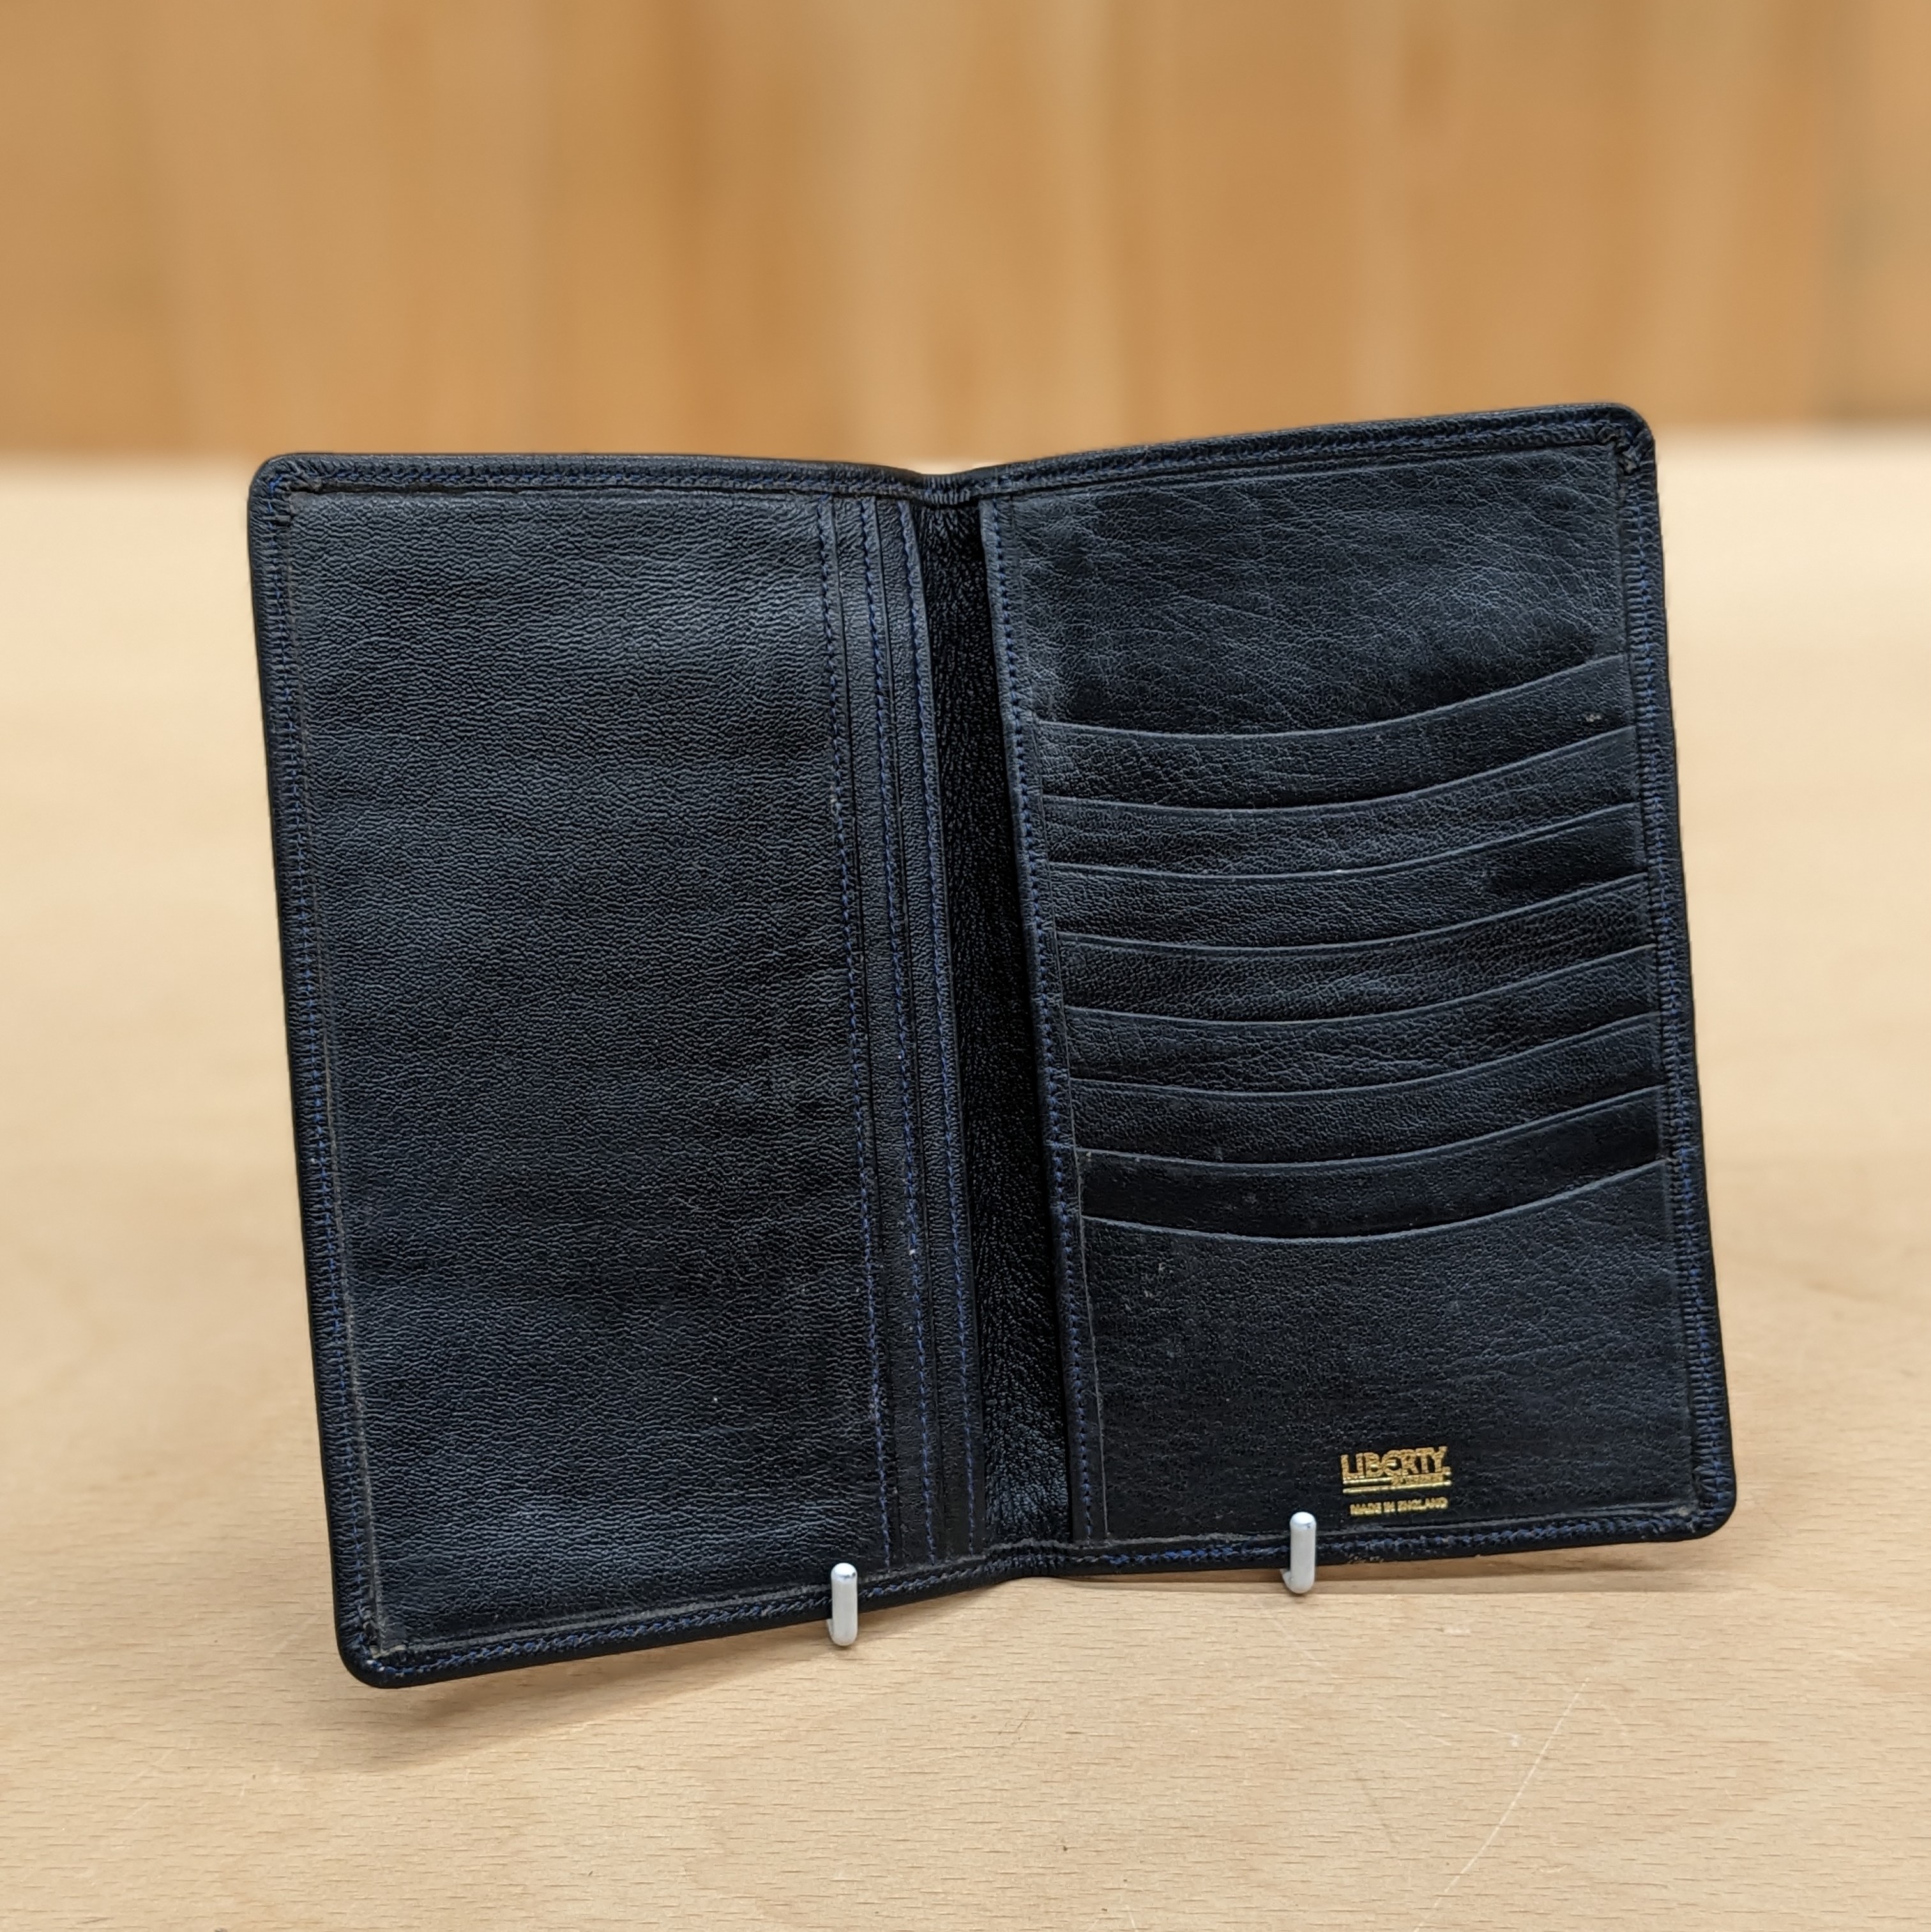 Liberty of London card holder opened showing Leather card slots and larger pockets